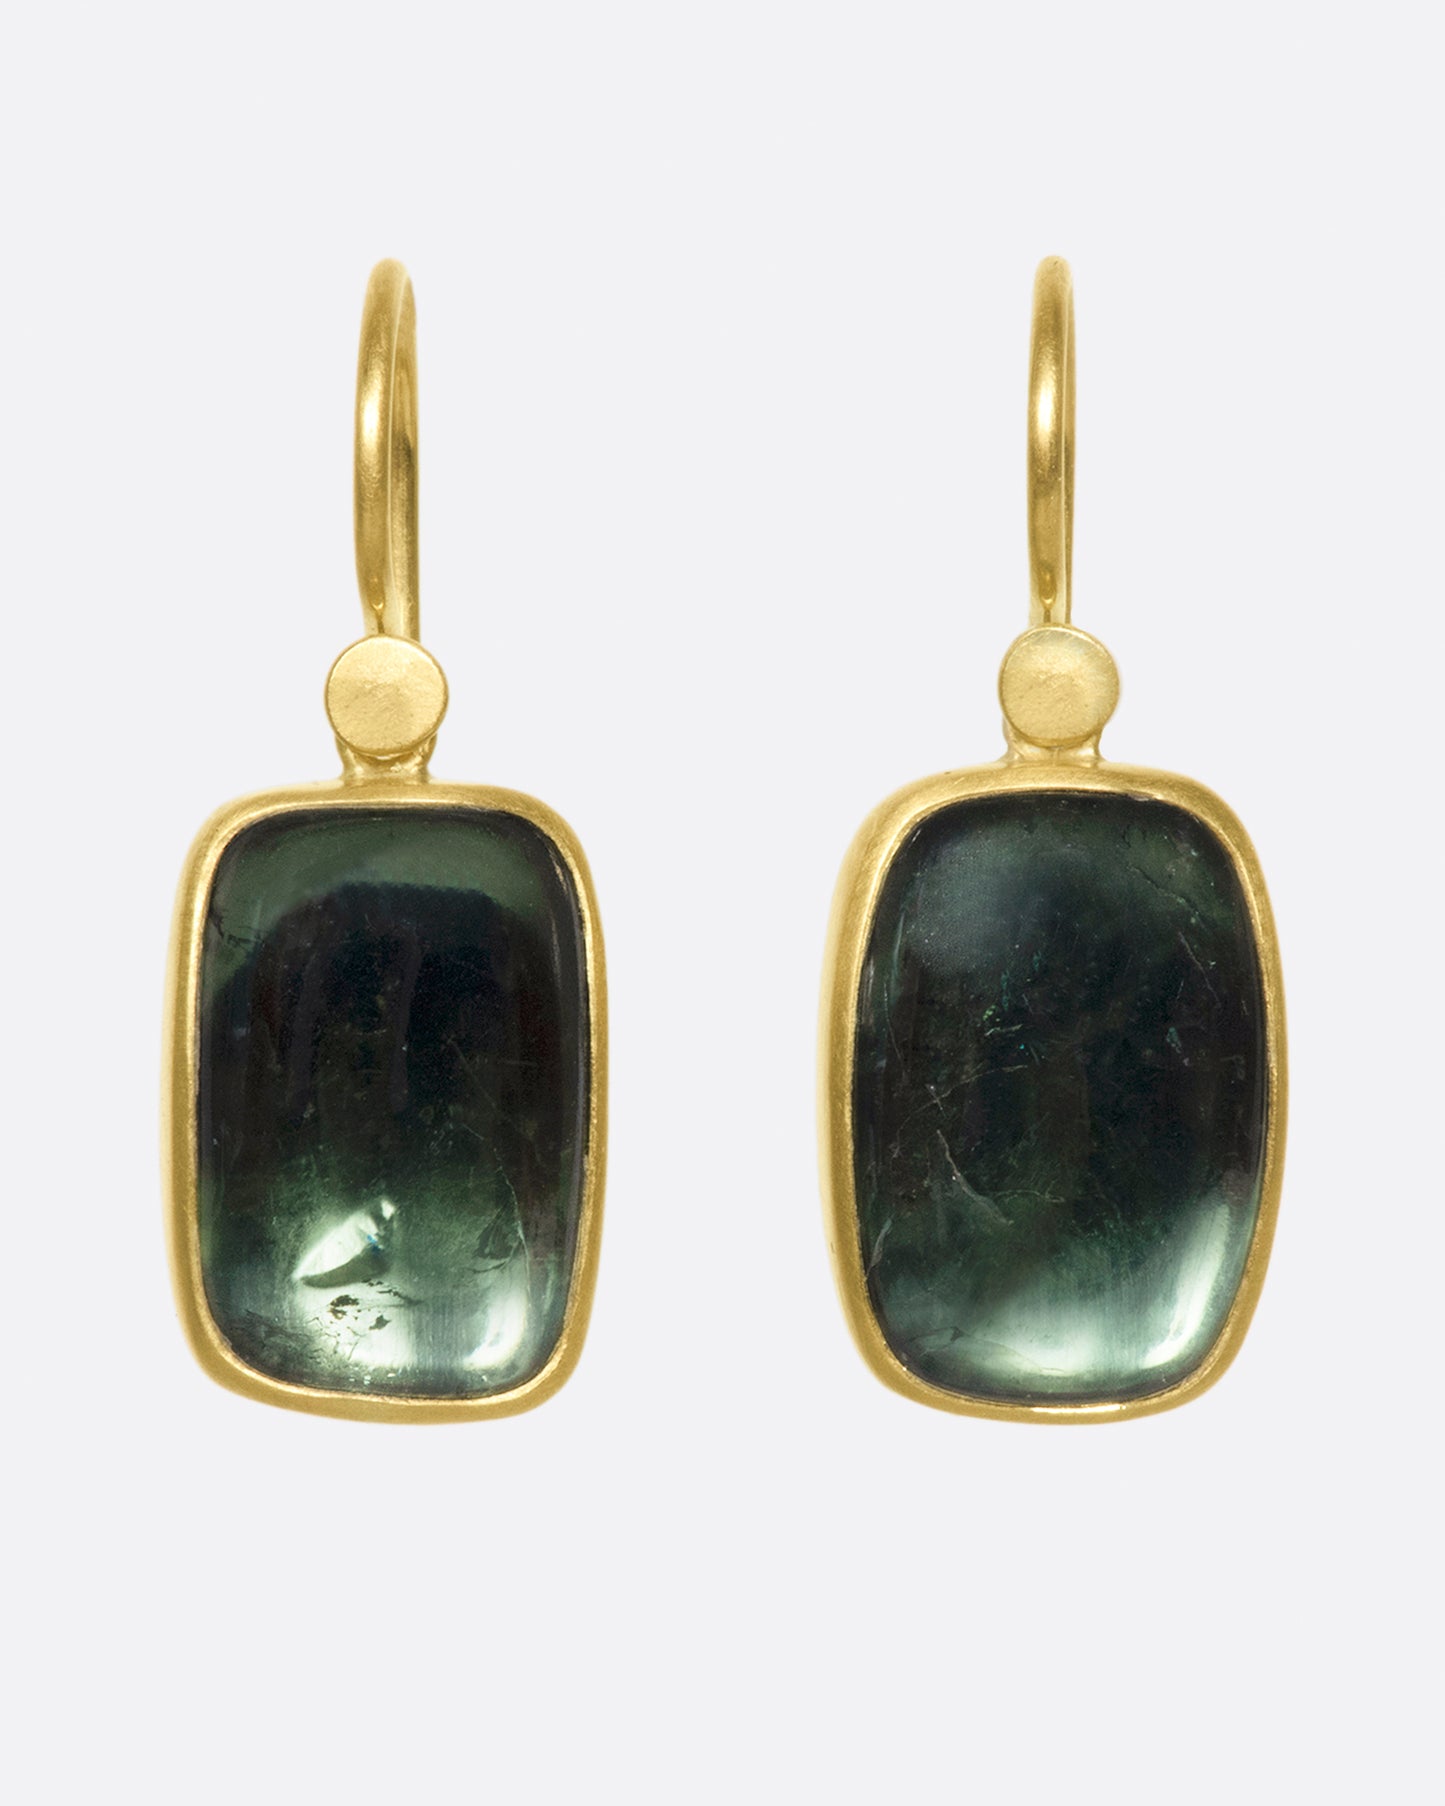 18k gold drops with green tourmaline chiclets.